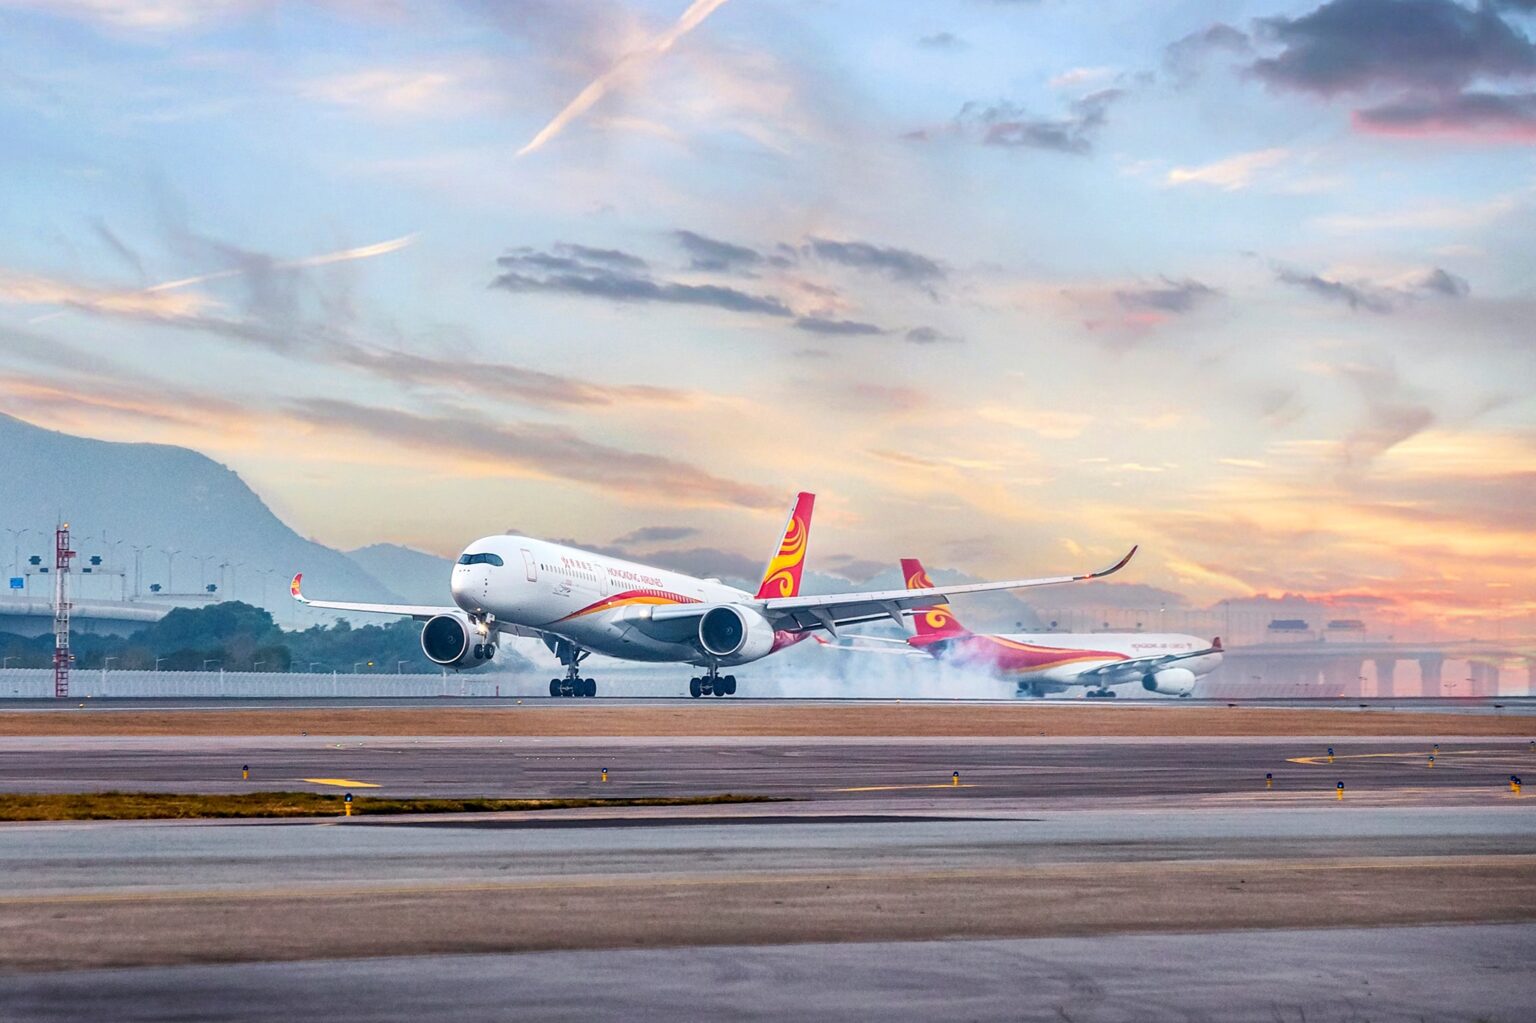 Two Hong Kong Airlines flight going in opposite directions on an airport runway